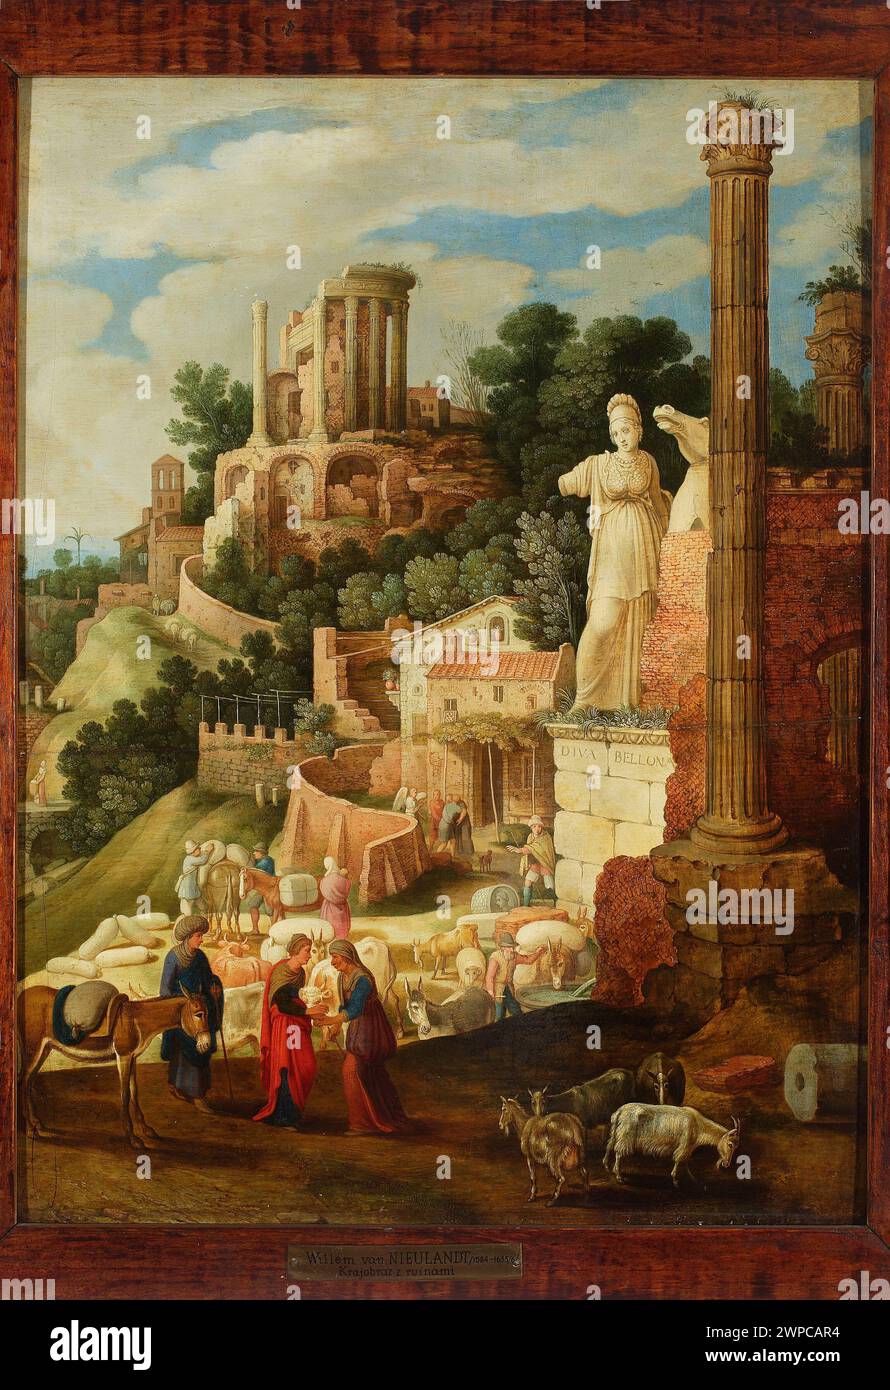 Landscape with anti -ruins, Belona and the scenes Tobias's return; Nieulandt, Guilliam Van II (1584-1635); 1614 (1614-00-00-1614-00-00);Bellona (Mitol.), Tobias (Bible), cattle, columns (architect), Flemish painting, landscapes, antique ruins, biblical scenes, purchase (provenance), Westy Temple Stock Photo